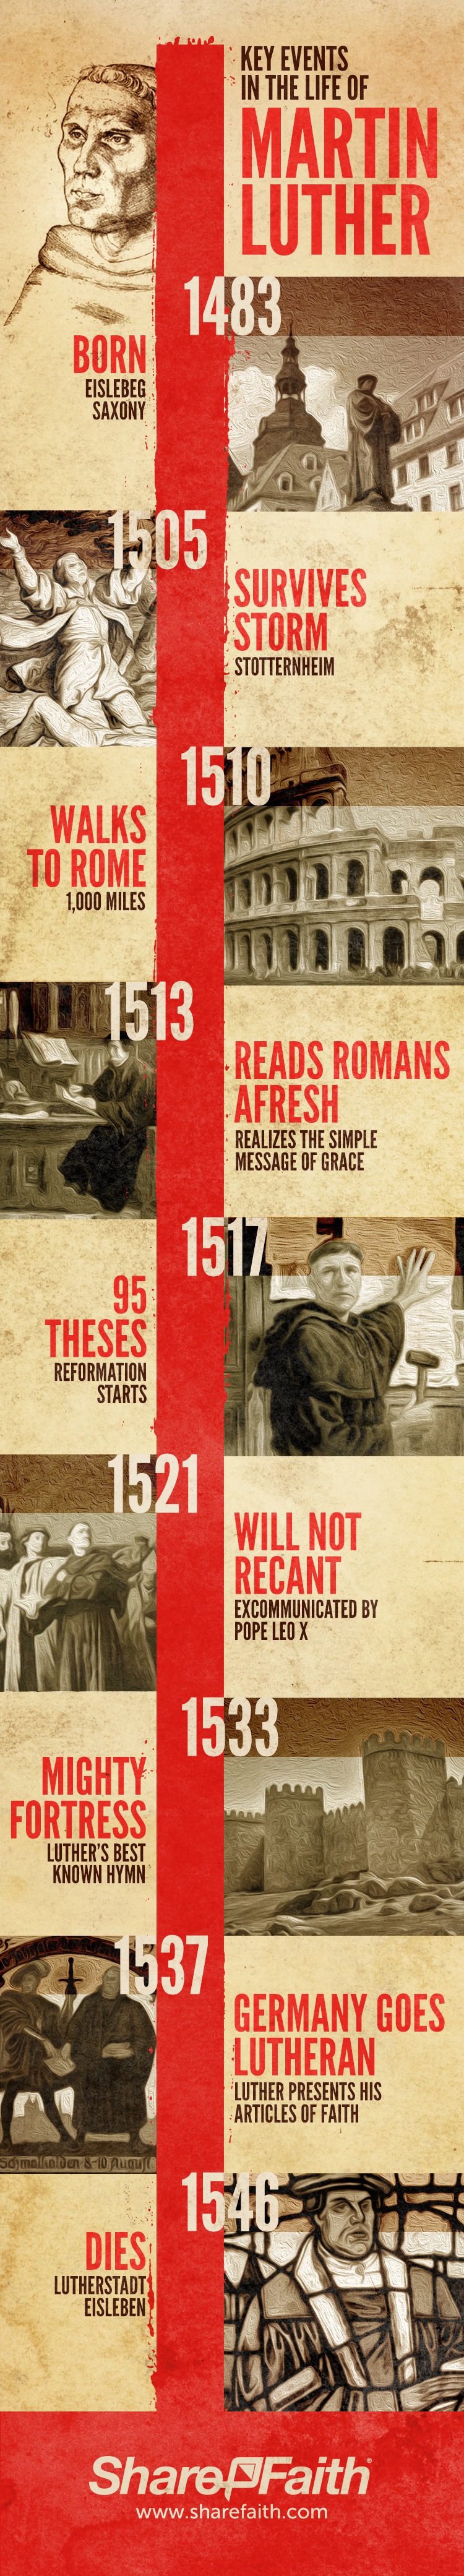 Martin Luther's Life Timeline